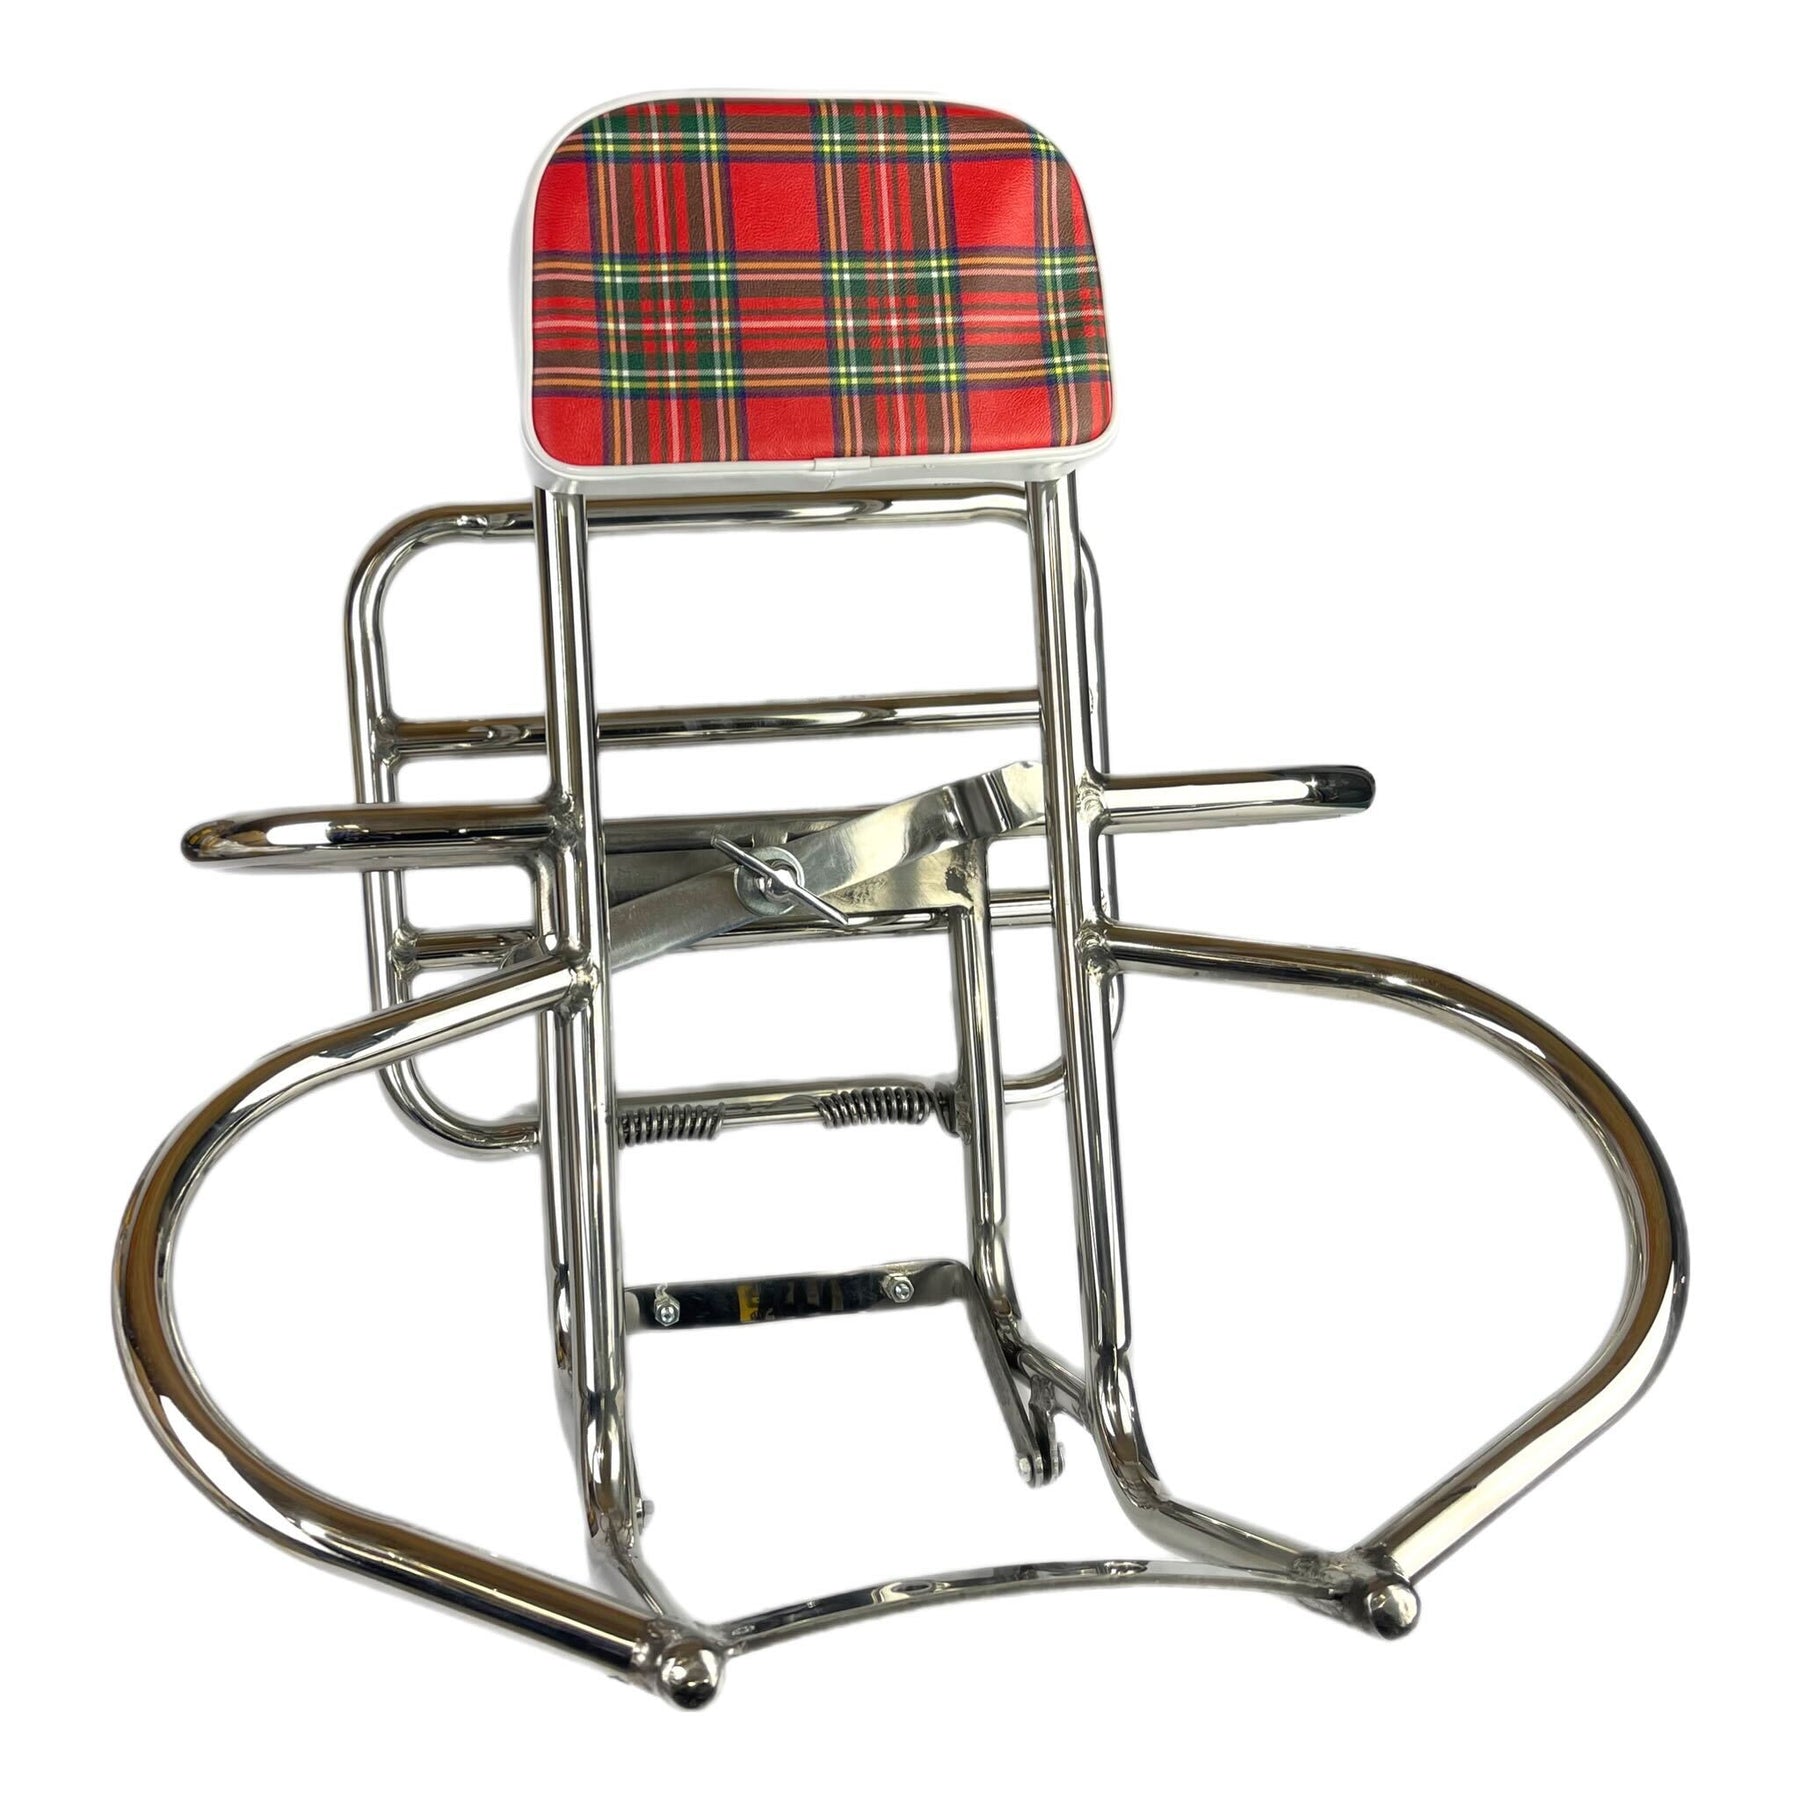 Vespa Lambretta Replacement Backrest Pad For 4 in 1 Stainless Carriers - Red Tartan